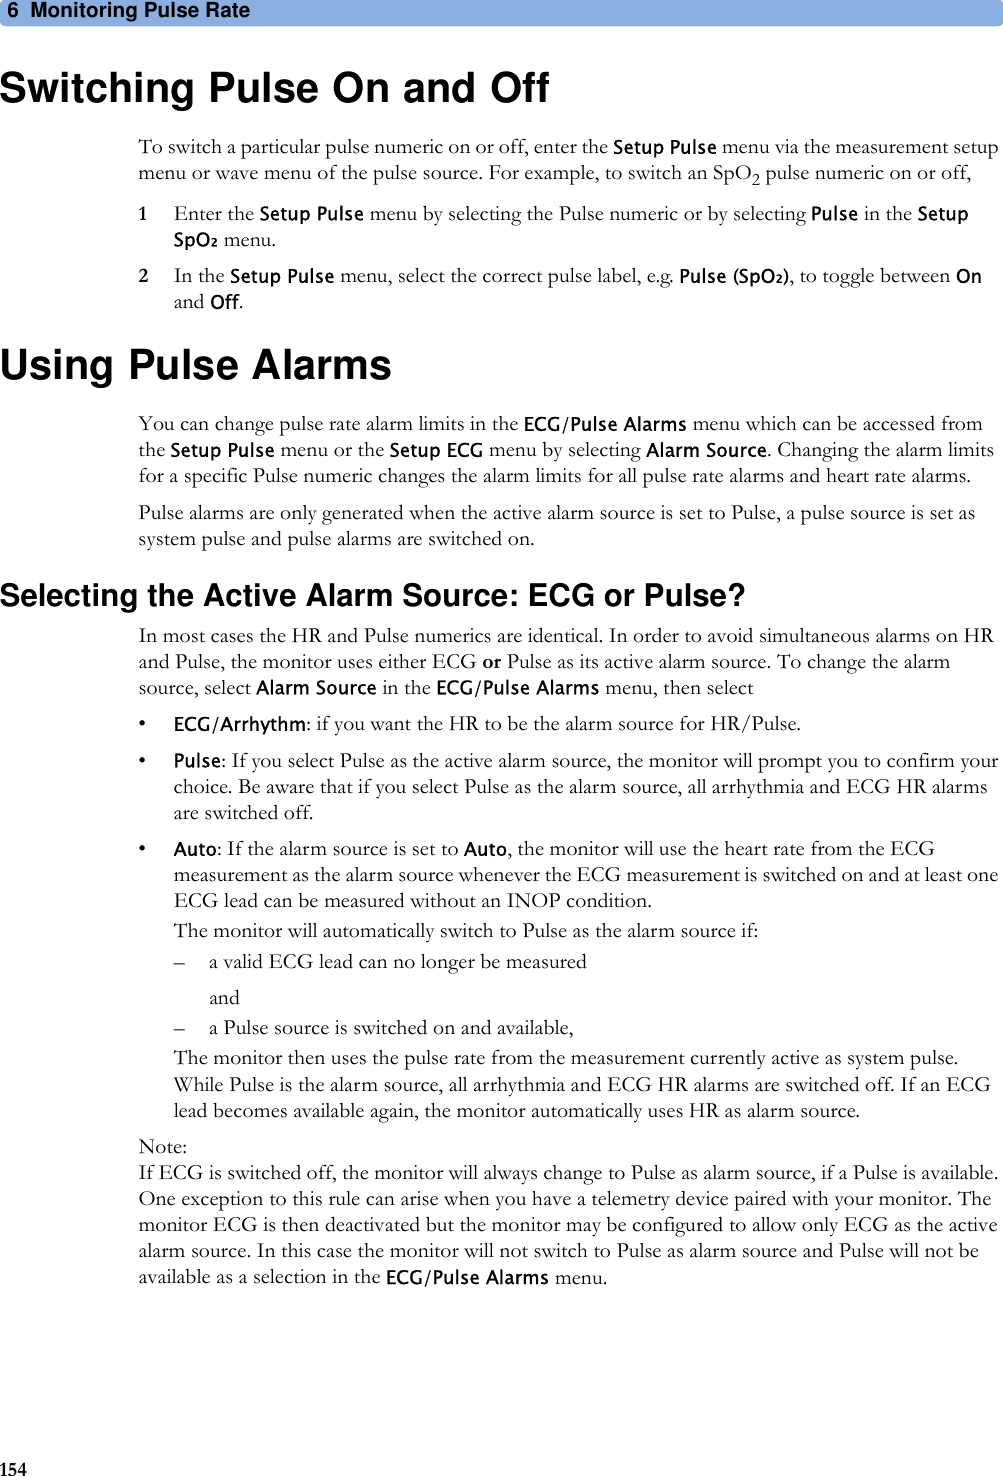 6 Monitoring Pulse Rate154Switching Pulse On and OffTo switch a particular pulse numeric on or off, enter the Setup Pulse menu via the measurement setup menu or wave menu of the pulse source. For example, to switch an SpO2 pulse numeric on or off,1Enter the Setup Pulse menu by selecting the Pulse numeric or by selecting Pulse in the Setup SpO₂ menu.2In the Setup Pulse menu, select the correct pulse label, e.g. Pulse (SpO₂), to toggle between On and Off.Using Pulse AlarmsYou can change pulse rate alarm limits in the ECG/Pulse Alarms menu which can be accessed from the Setup Pulse menu or the Setup ECG menu by selecting Alarm Source. Changing the alarm limits for a specific Pulse numeric changes the alarm limits for all pulse rate alarms and heart rate alarms.Pulse alarms are only generated when the active alarm source is set to Pulse, a pulse source is set as system pulse and pulse alarms are switched on.Selecting the Active Alarm Source: ECG or Pulse?In most cases the HR and Pulse numerics are identical. In order to avoid simultaneous alarms on HR and Pulse, the monitor uses either ECG or Pulse as its active alarm source. To change the alarm source, select Alarm Source in the ECG/Pulse Alarms menu, then select•ECG/Arrhythm: if you want the HR to be the alarm source for HR/Pulse.•Pulse: If you select Pulse as the active alarm source, the monitor will prompt you to confirm your choice. Be aware that if you select Pulse as the alarm source, all arrhythmia and ECG HR alarms are switched off.•Auto: If the alarm source is set to Auto, the monitor will use the heart rate from the ECG measurement as the alarm source whenever the ECG measurement is switched on and at least one ECG lead can be measured without an INOP condition.The monitor will automatically switch to Pulse as the alarm source if:– a valid ECG lead can no longer be measuredand– a Pulse source is switched on and available,The monitor then uses the pulse rate from the measurement currently active as system pulse. While Pulse is the alarm source, all arrhythmia and ECG HR alarms are switched off. If an ECG lead becomes available again, the monitor automatically uses HR as alarm source.Note:If ECG is switched off, the monitor will always change to Pulse as alarm source, if a Pulse is available. One exception to this rule can arise when you have a telemetry device paired with your monitor. The monitor ECG is then deactivated but the monitor may be configured to allow only ECG as the active alarm source. In this case the monitor will not switch to Pulse as alarm source and Pulse will not be available as a selection in the ECG/Pulse Alarms menu.